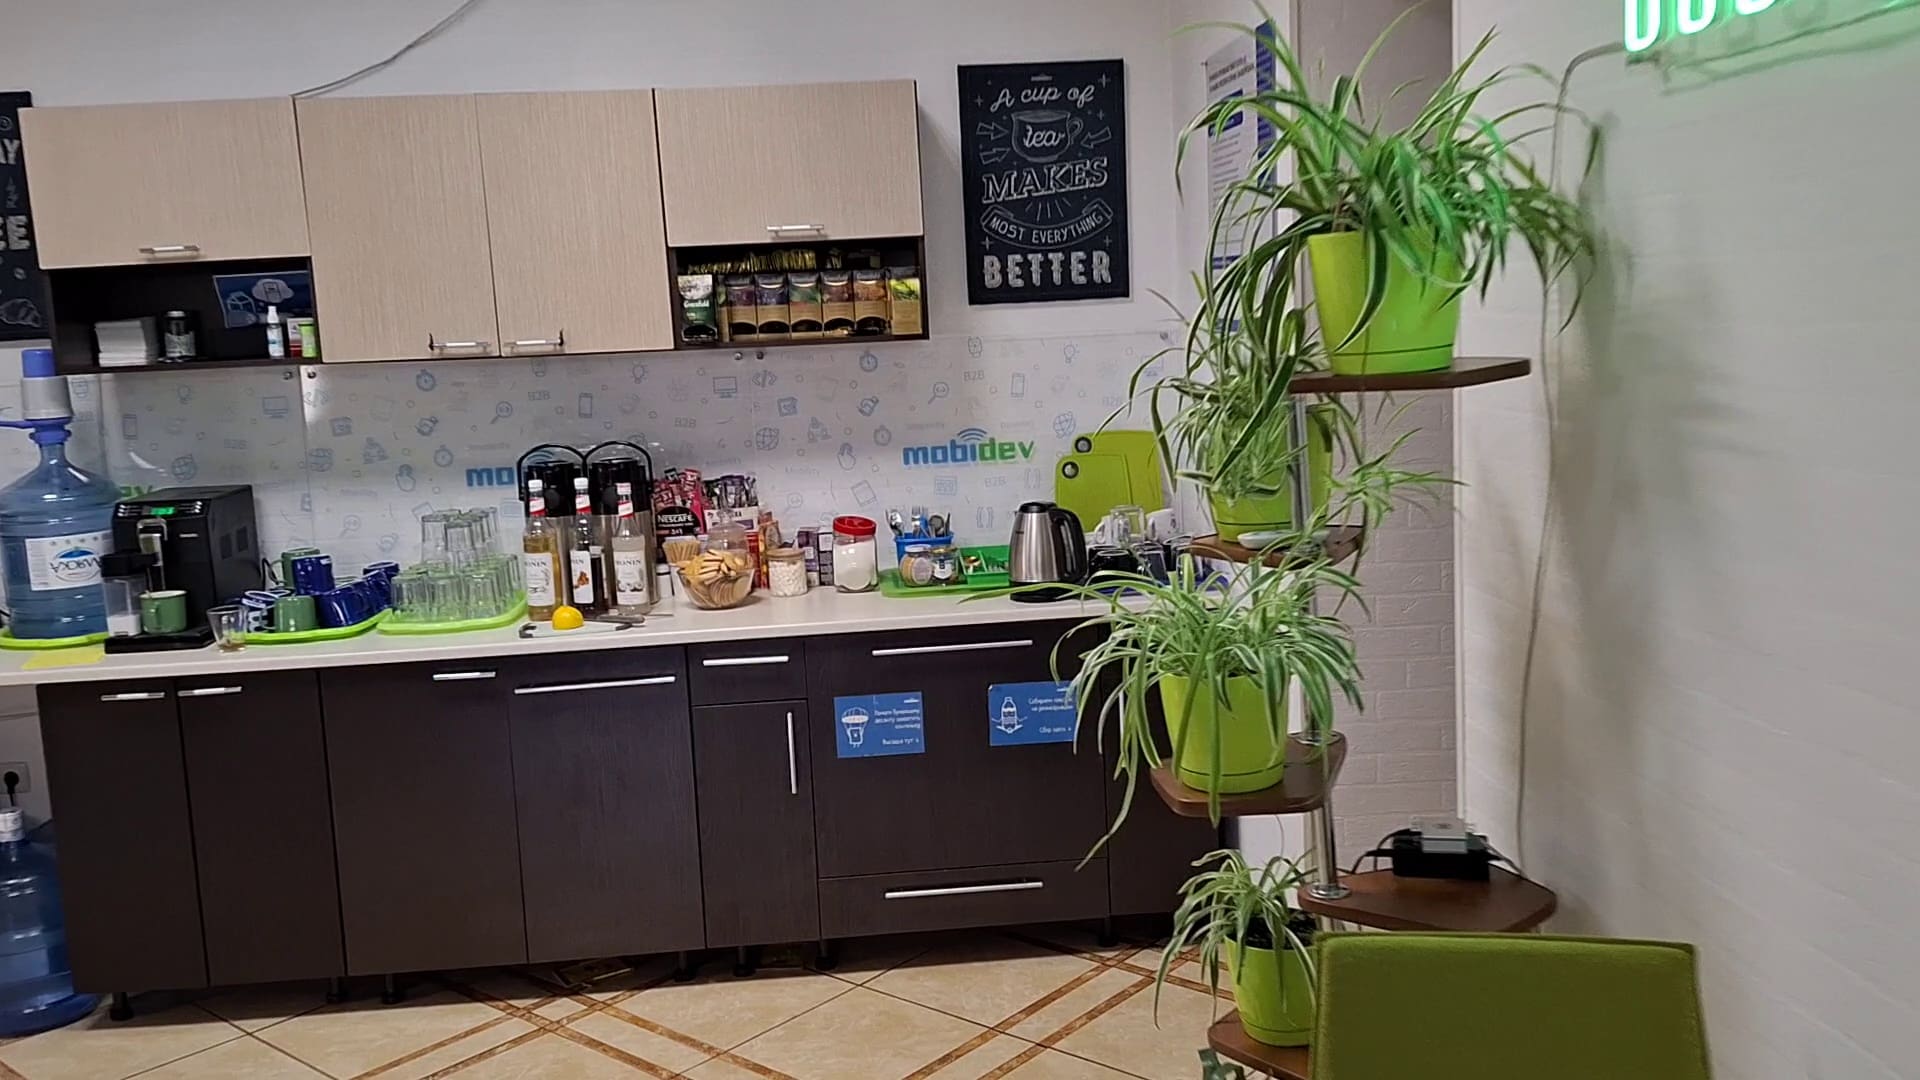 A photo of the kitchen that was not included in the dataset